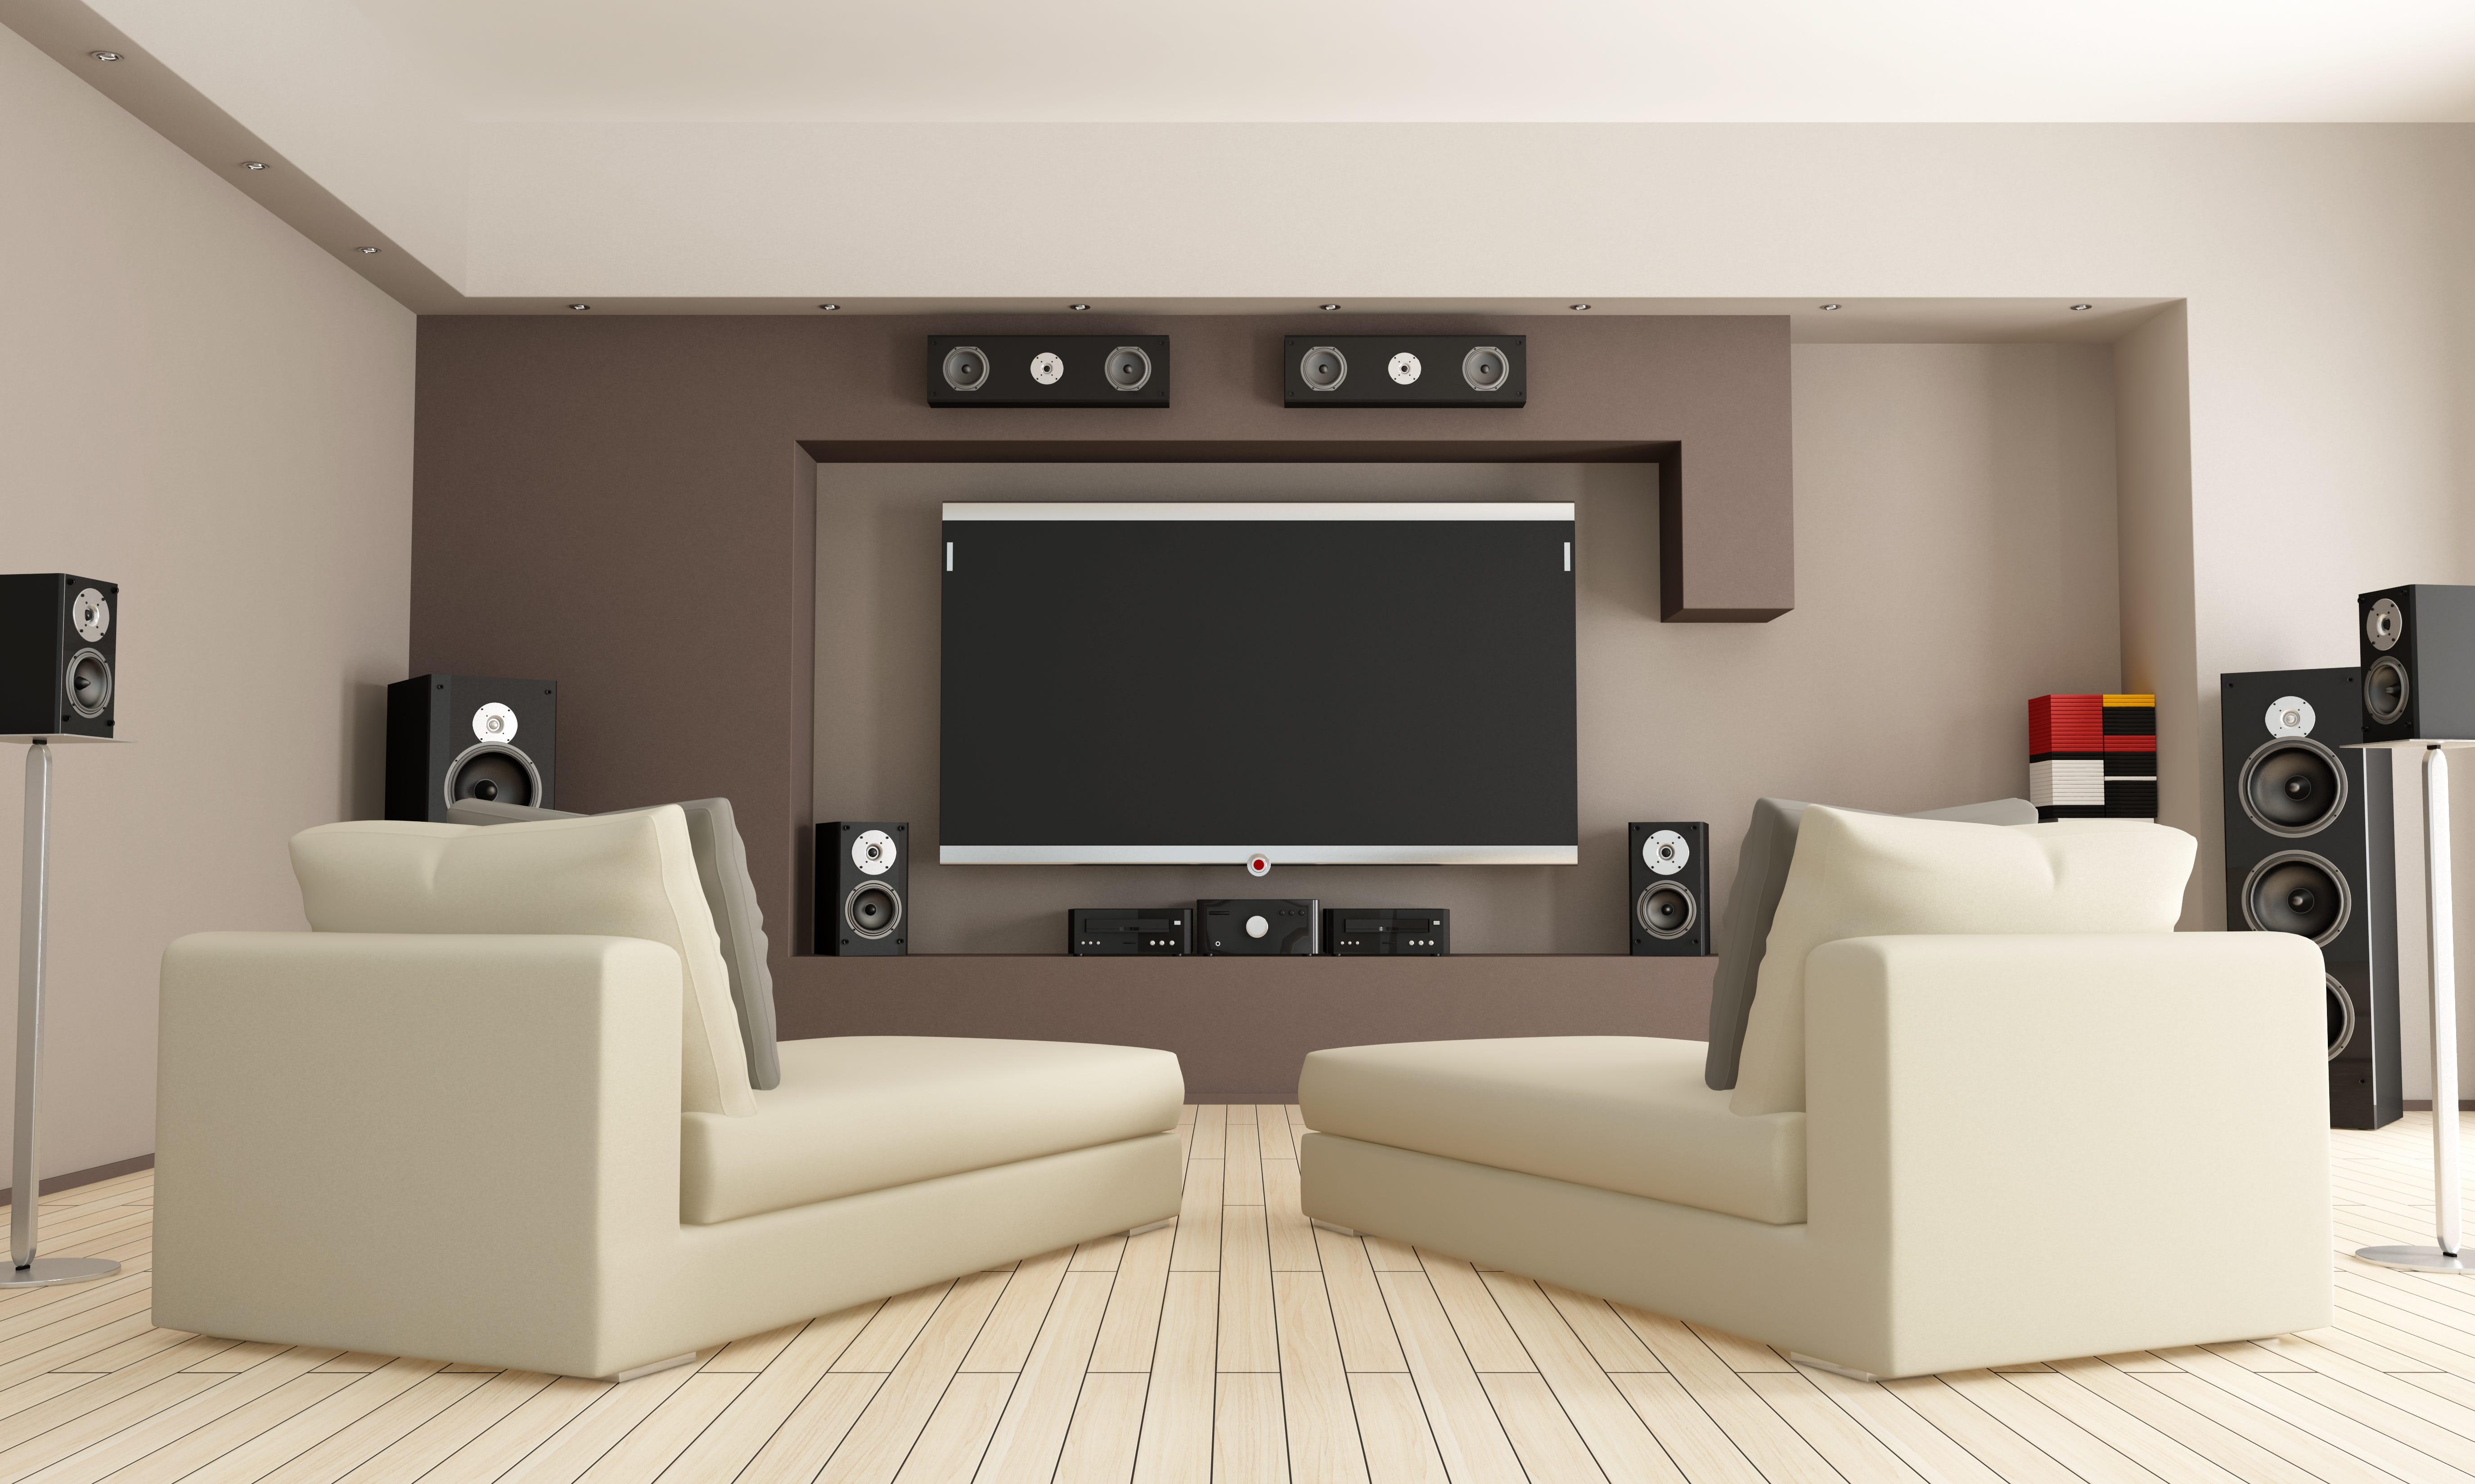 The Essentials of a Home Theatre